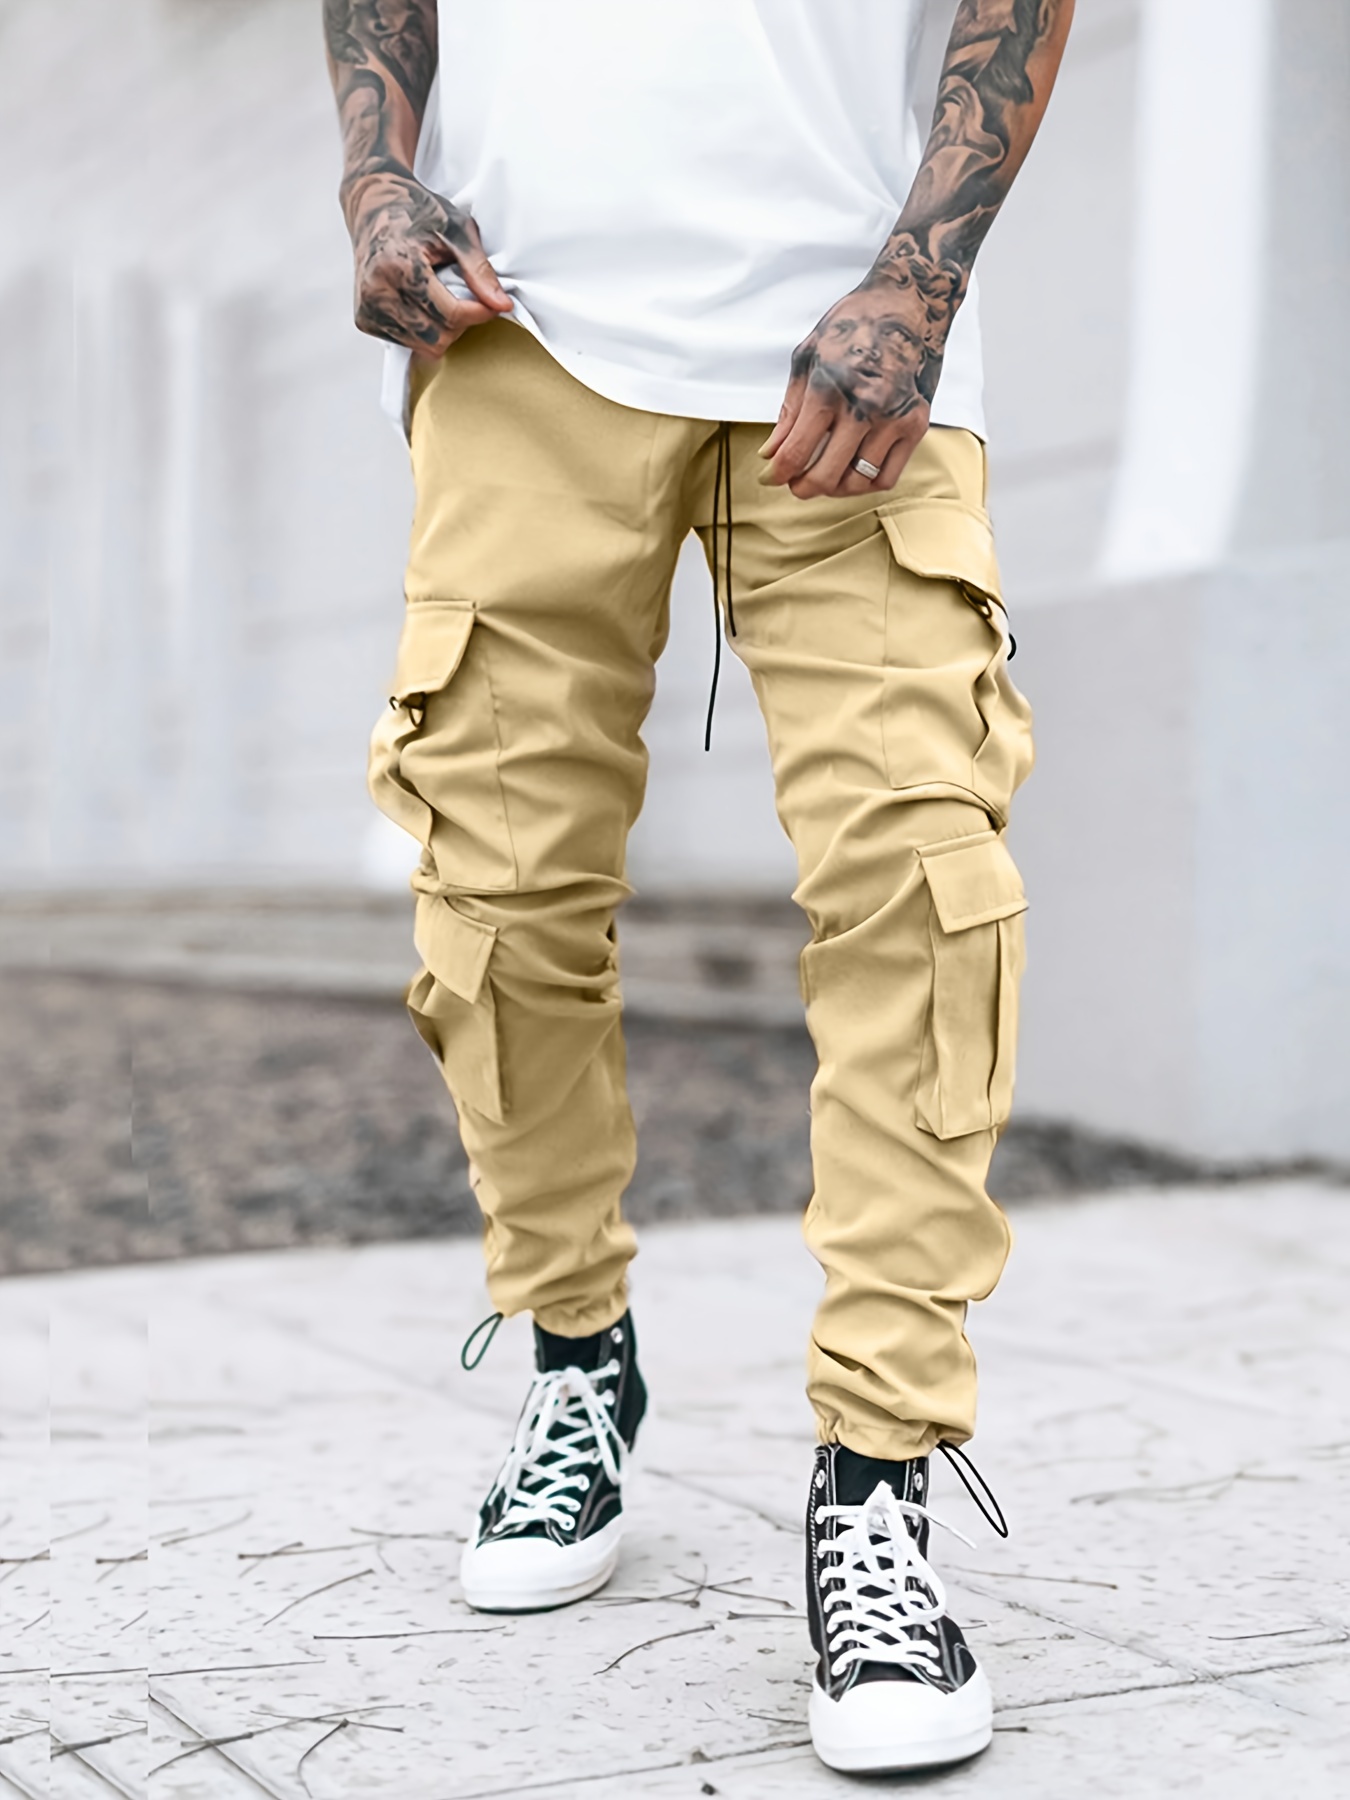 Men's Relaxed Fit Cargo Pants With Pockets, Loose Trendy Overalls